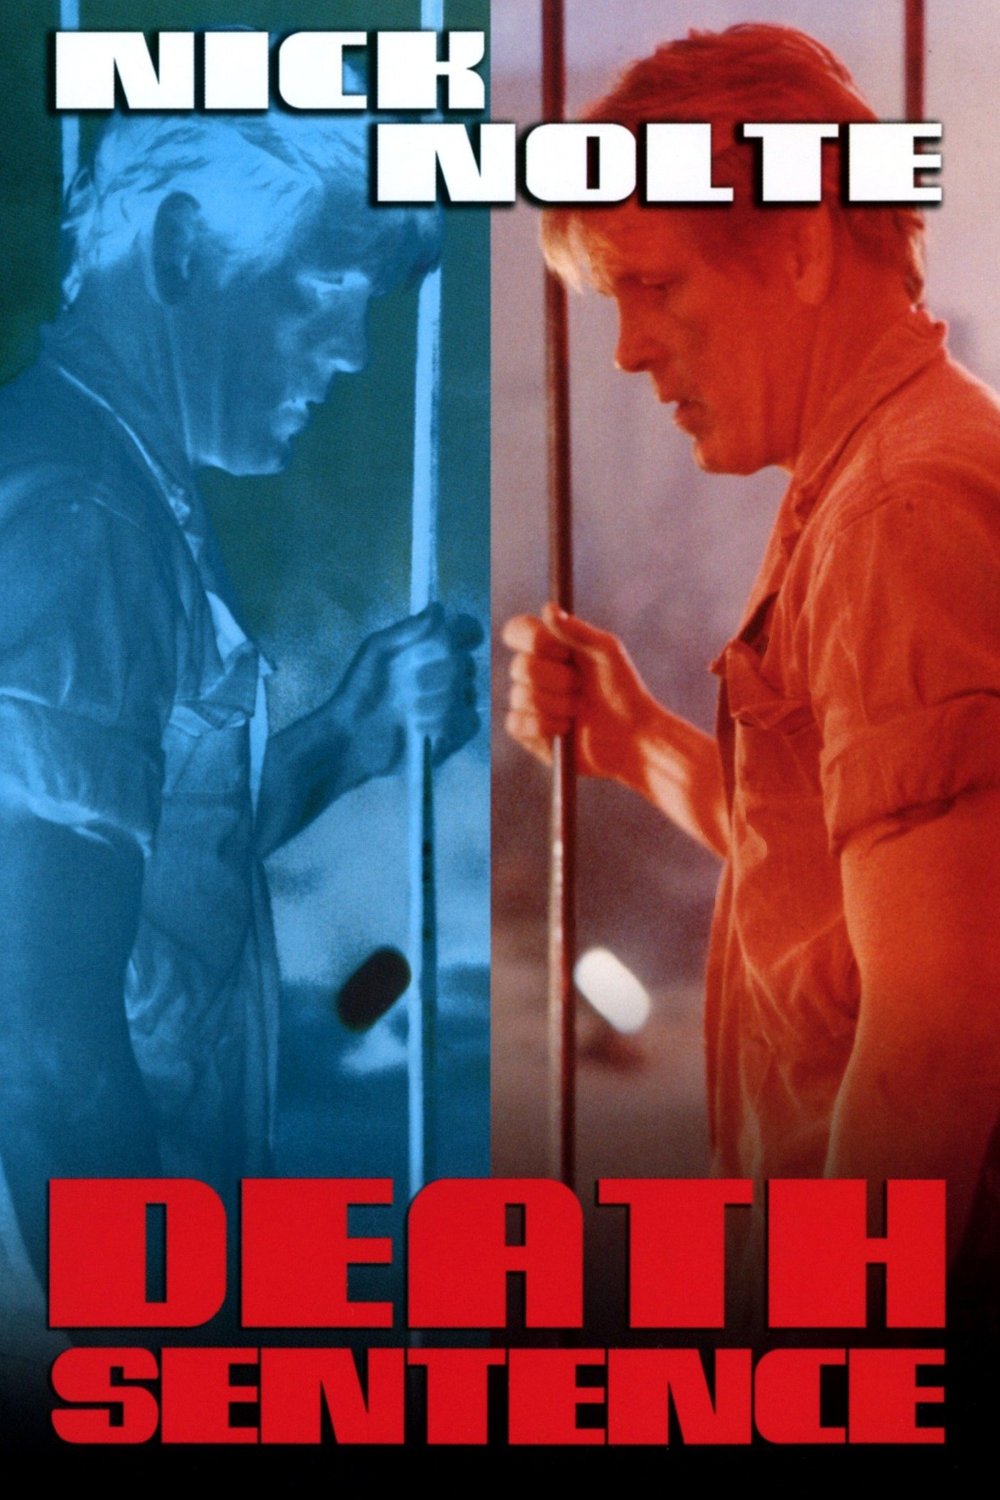 Poster of the movie Death Sentence